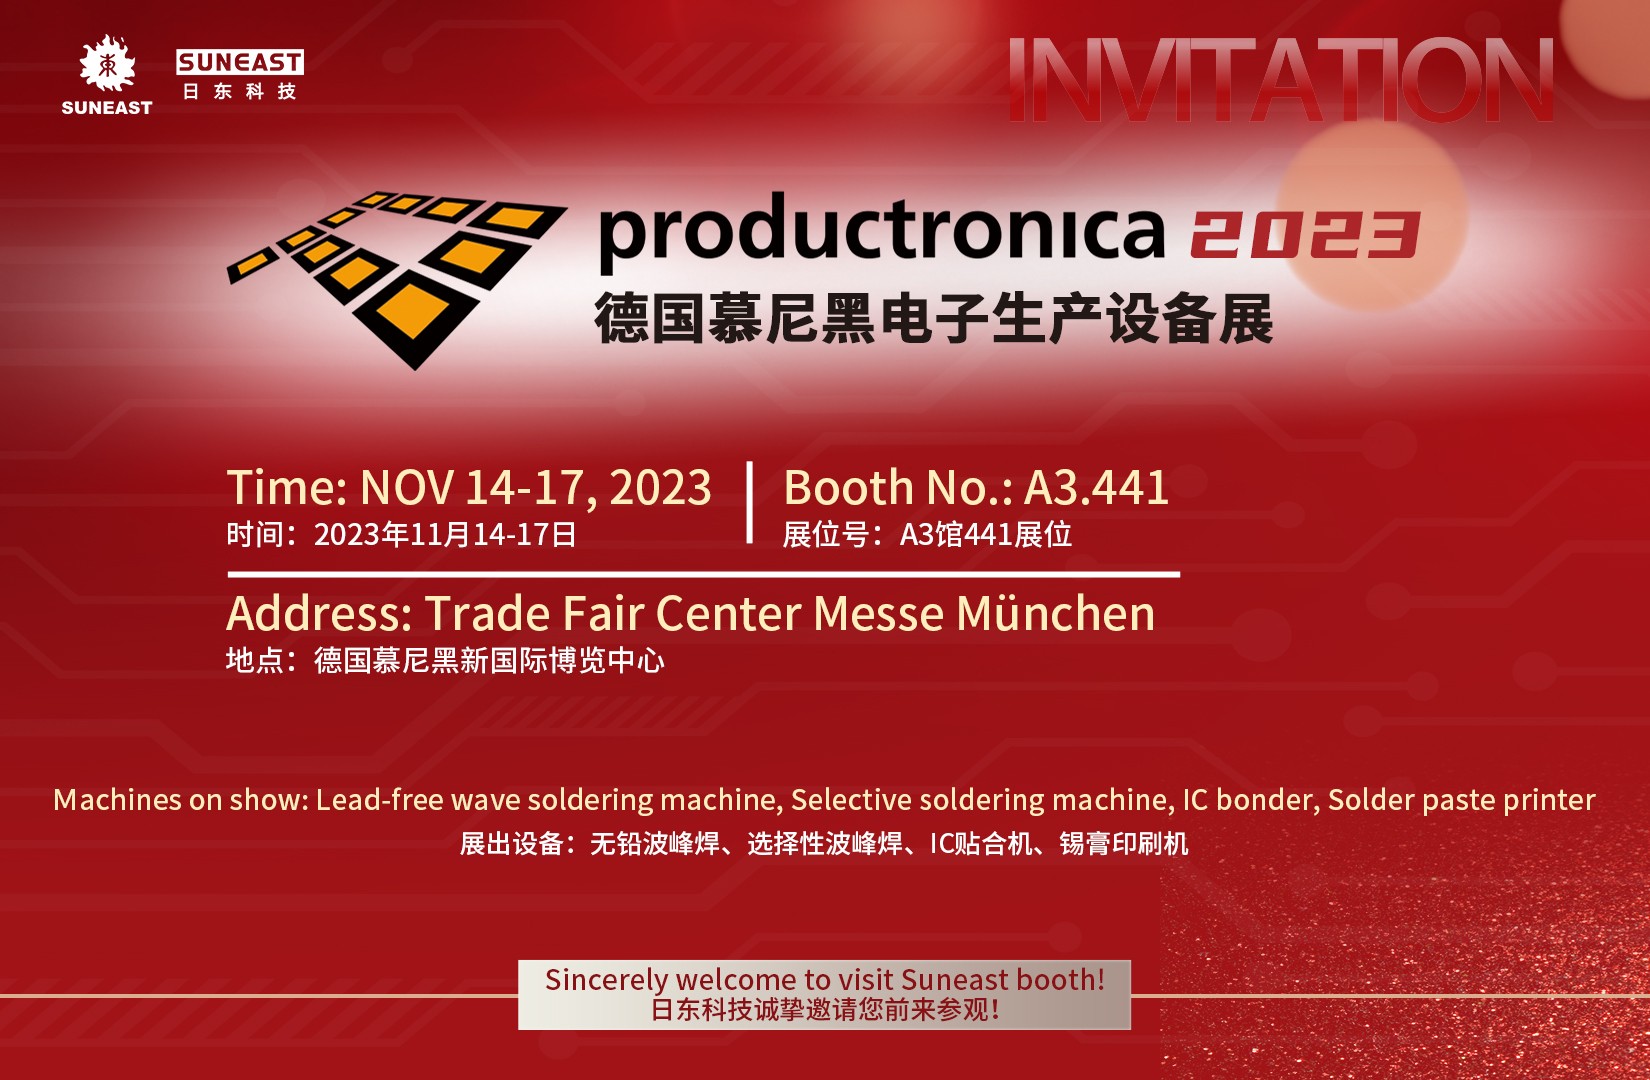 Sincerely welcome to visit Suneast booth in Productronica 2023!